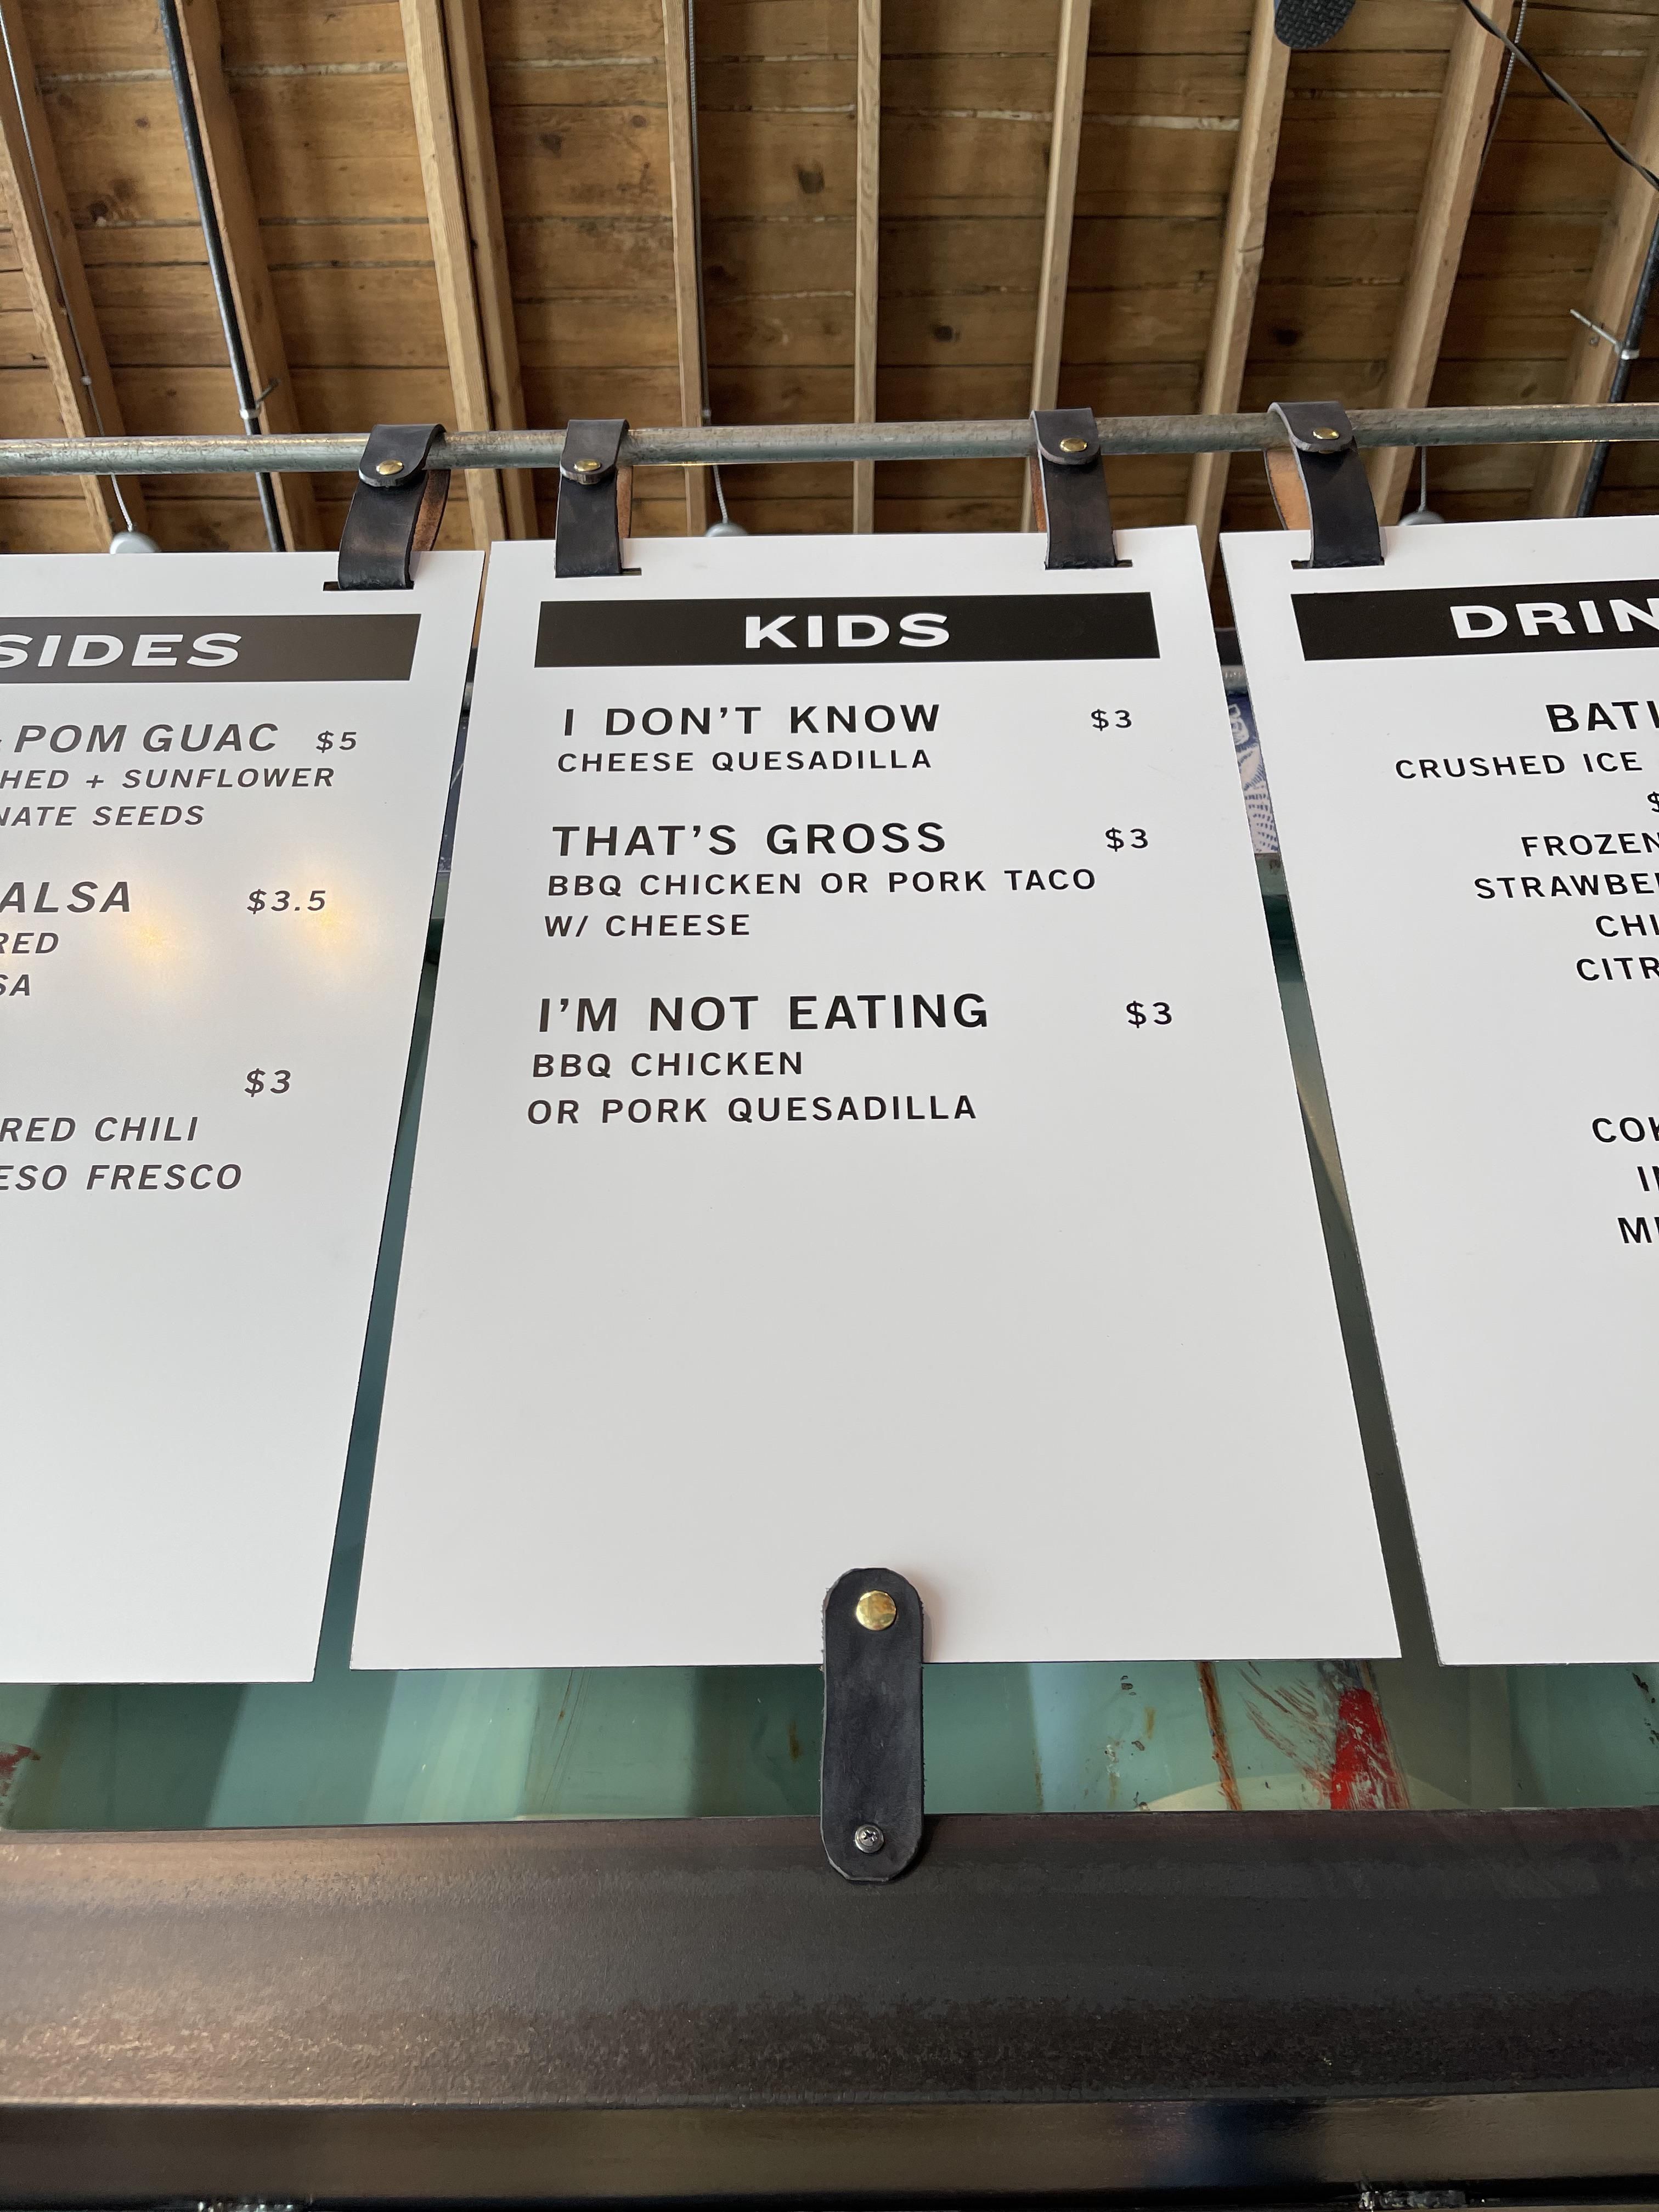 They really nailed the kids menu.